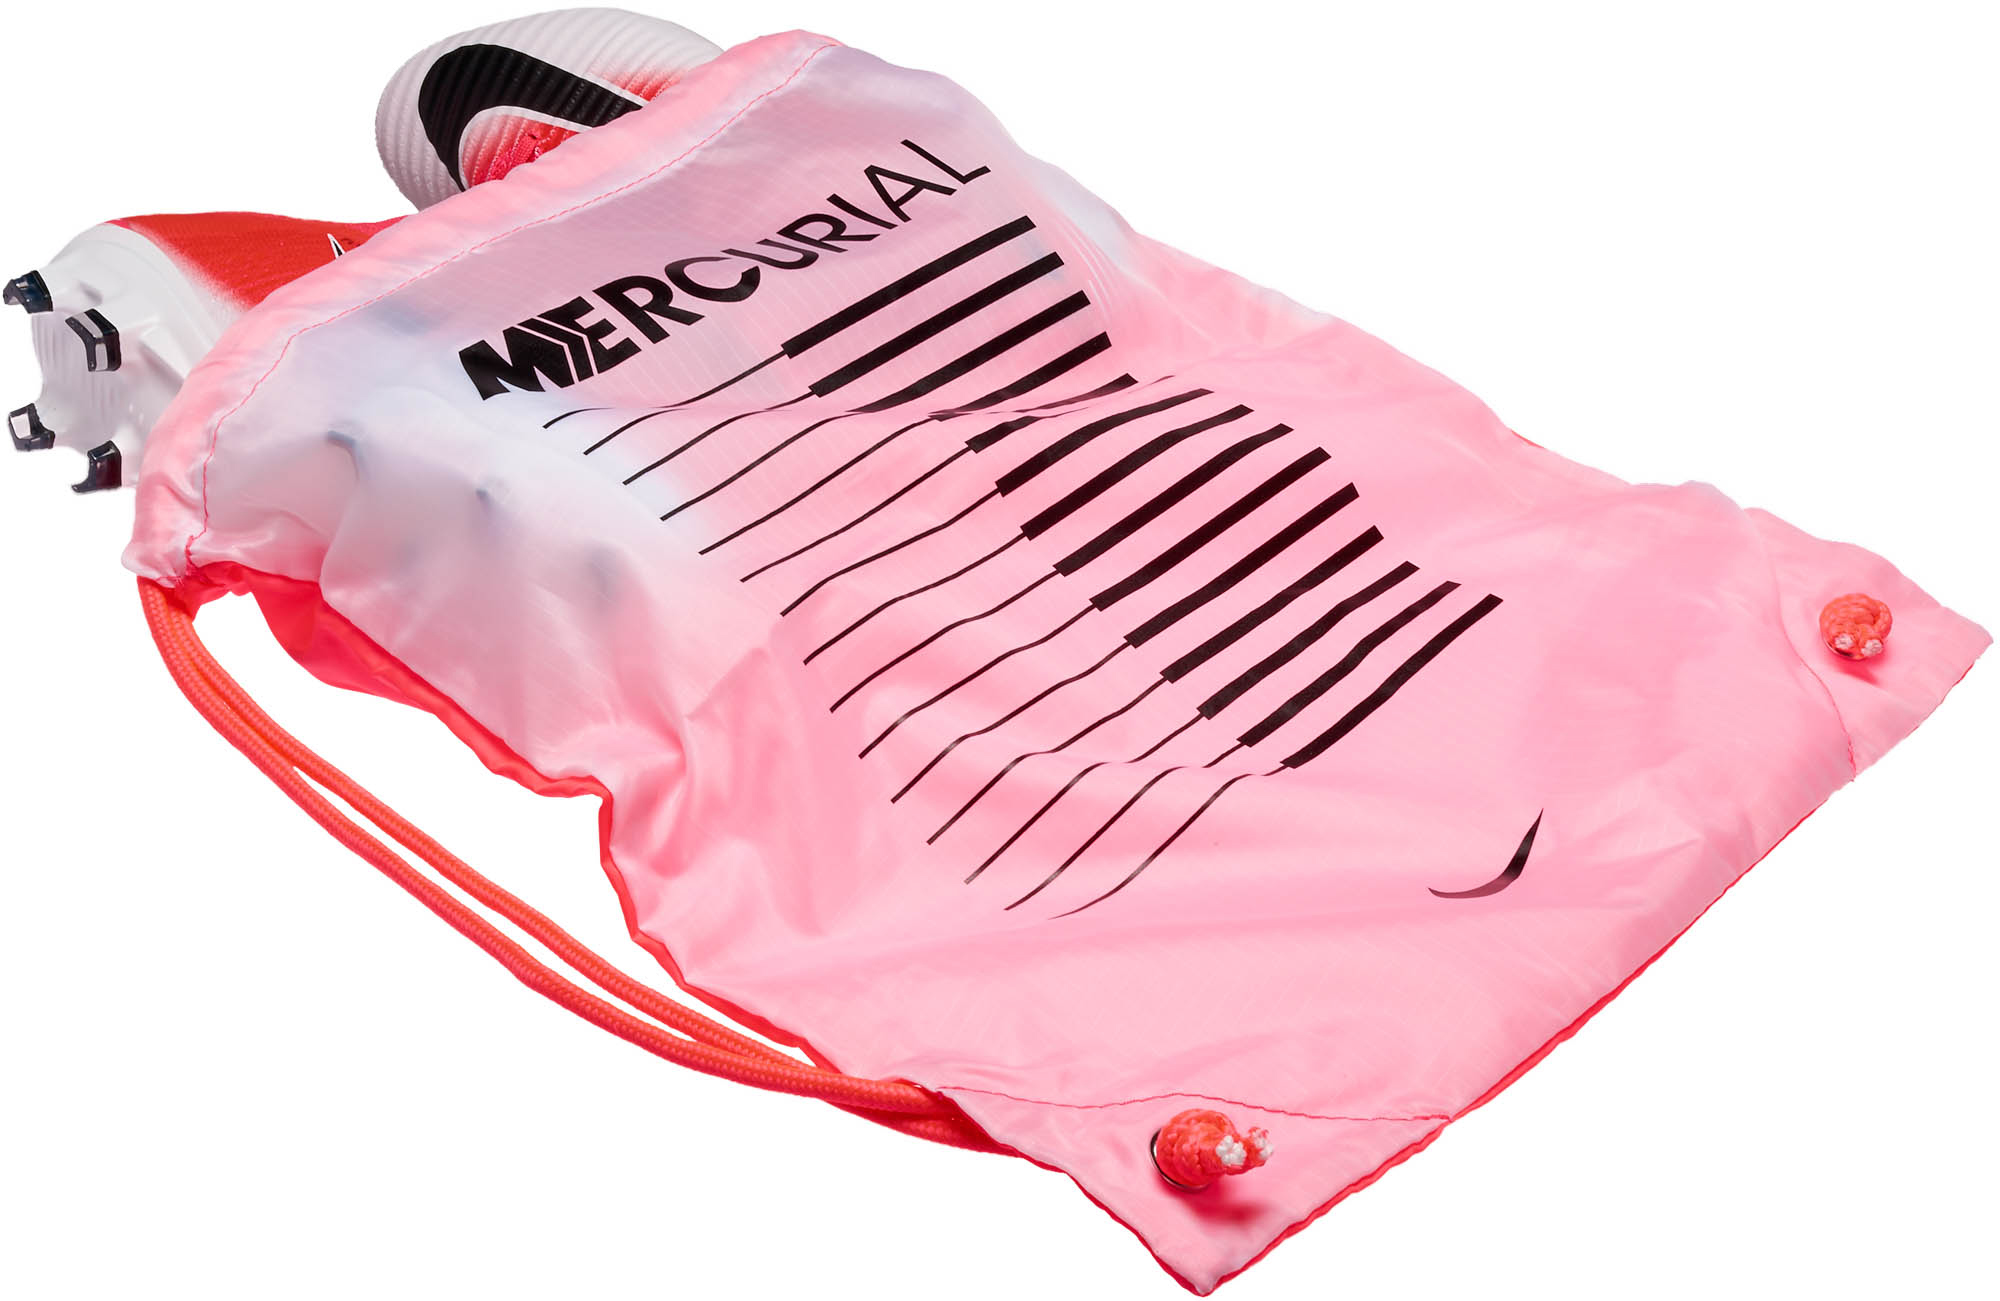 Mercurial Superfly V - Pink Cleats